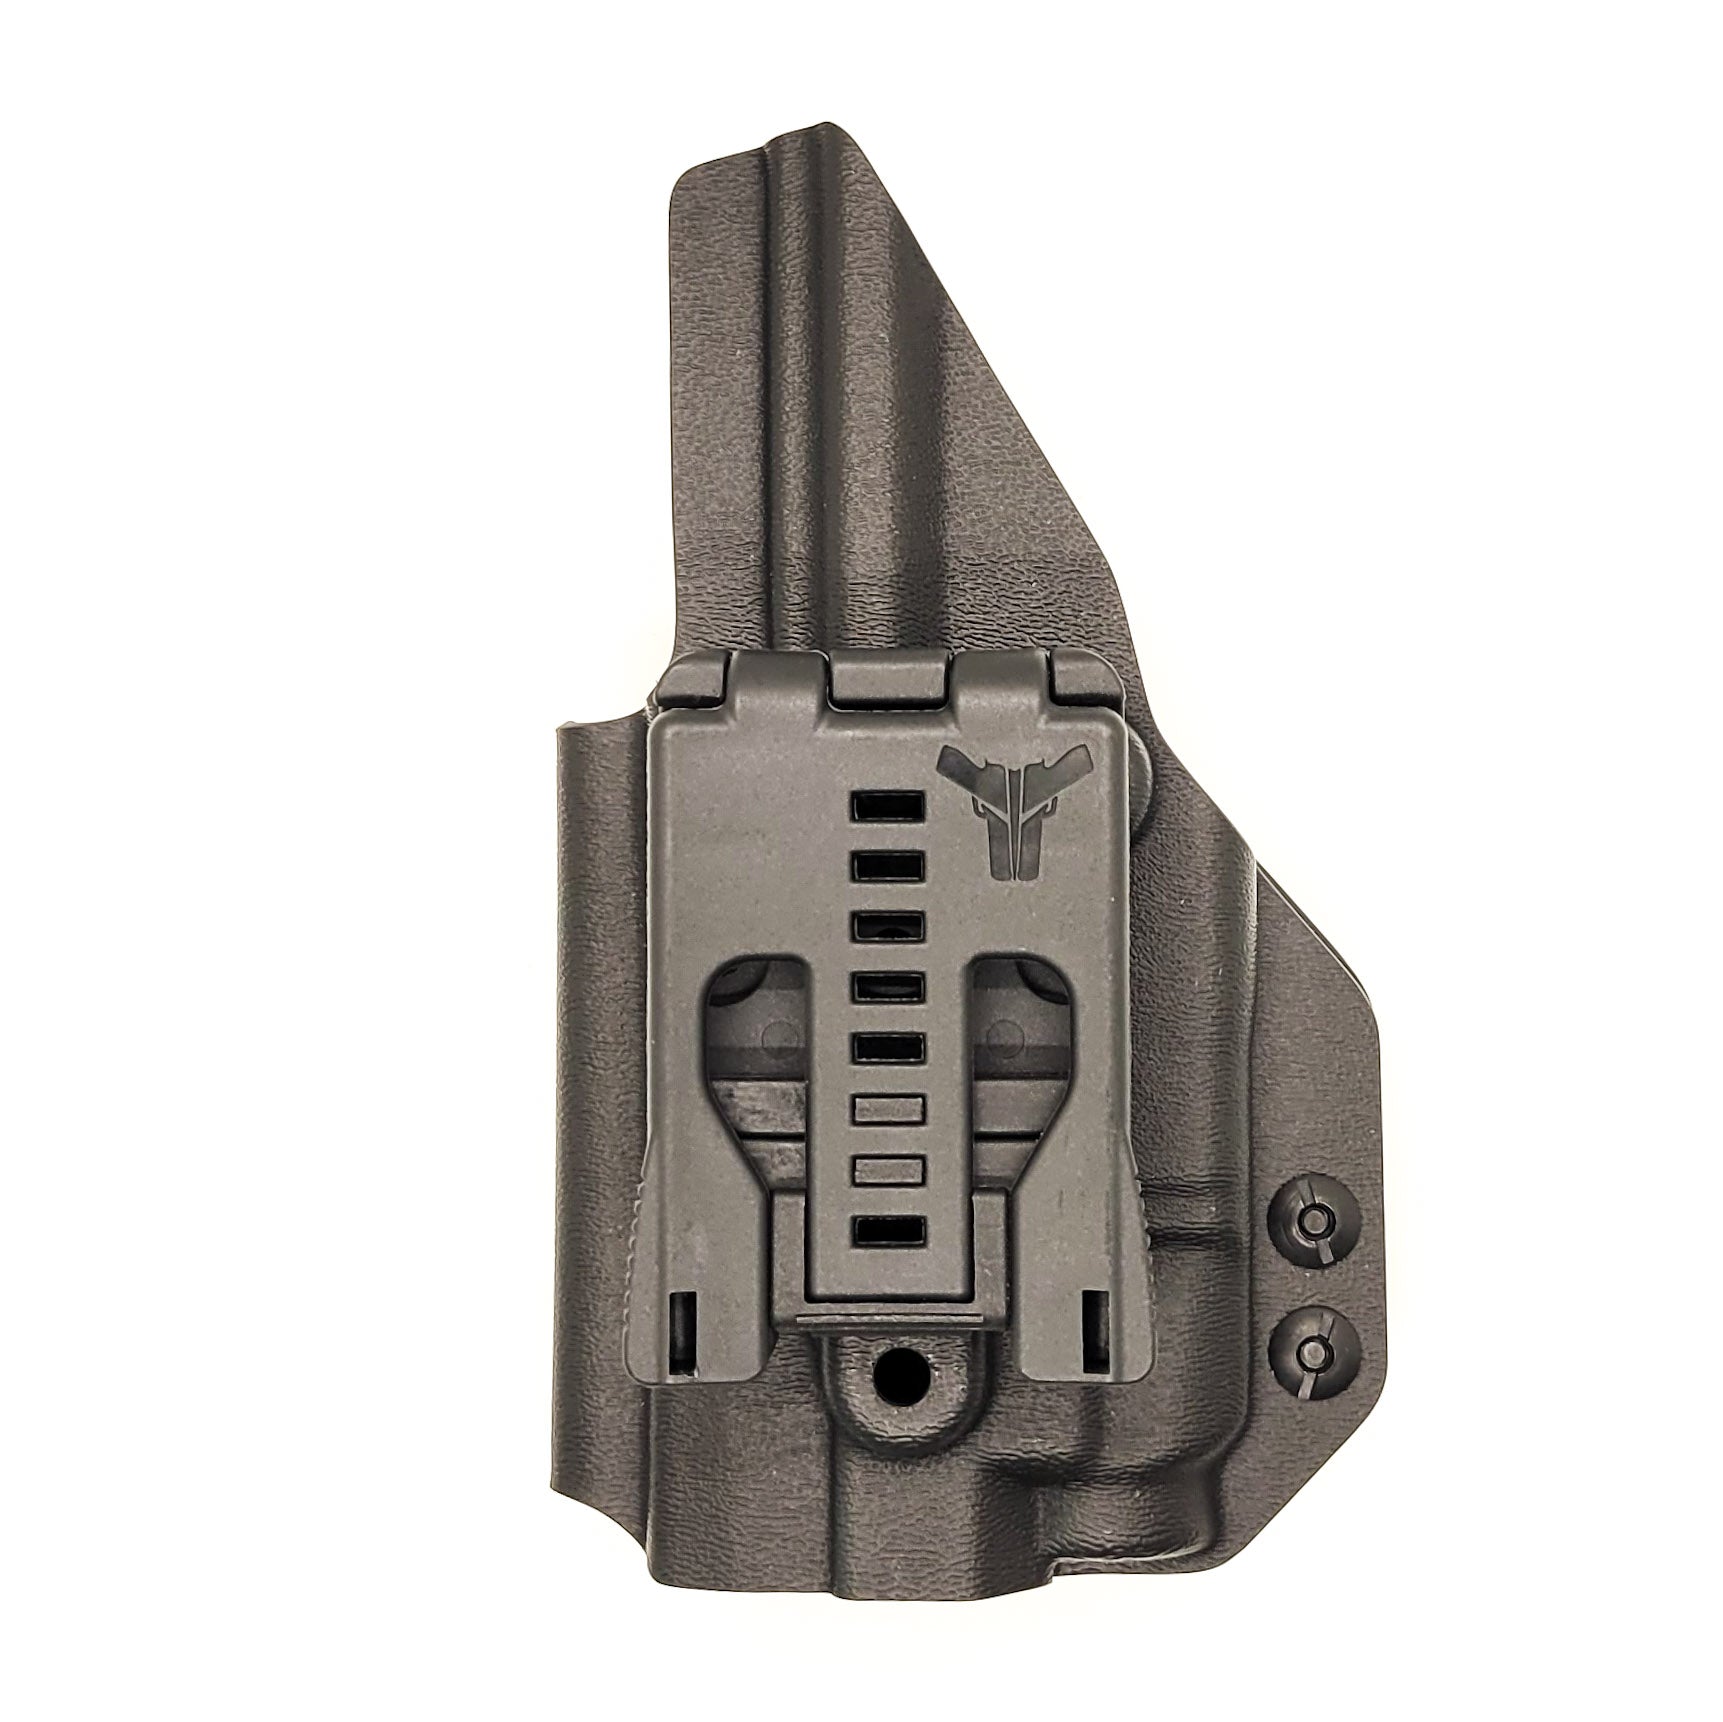 Outside waistband holster designed to fit the Sig Sauer P365 and P365XL pistol series with the Tactical Development Pro Ledge Tactical Application Rail and Streamlight TLR-7 or TLR-7A light mounted to the weapon.  This holster will fit the Sig P365, P365X, P365XL Spectre, P365 XL RomeoZero, P365X RomeoZero, P365 SAS and P365XL Spectre Comp with the Tactical Development Pro Ledge Tactical Application Rail and TLR-7 or TLR-7A.